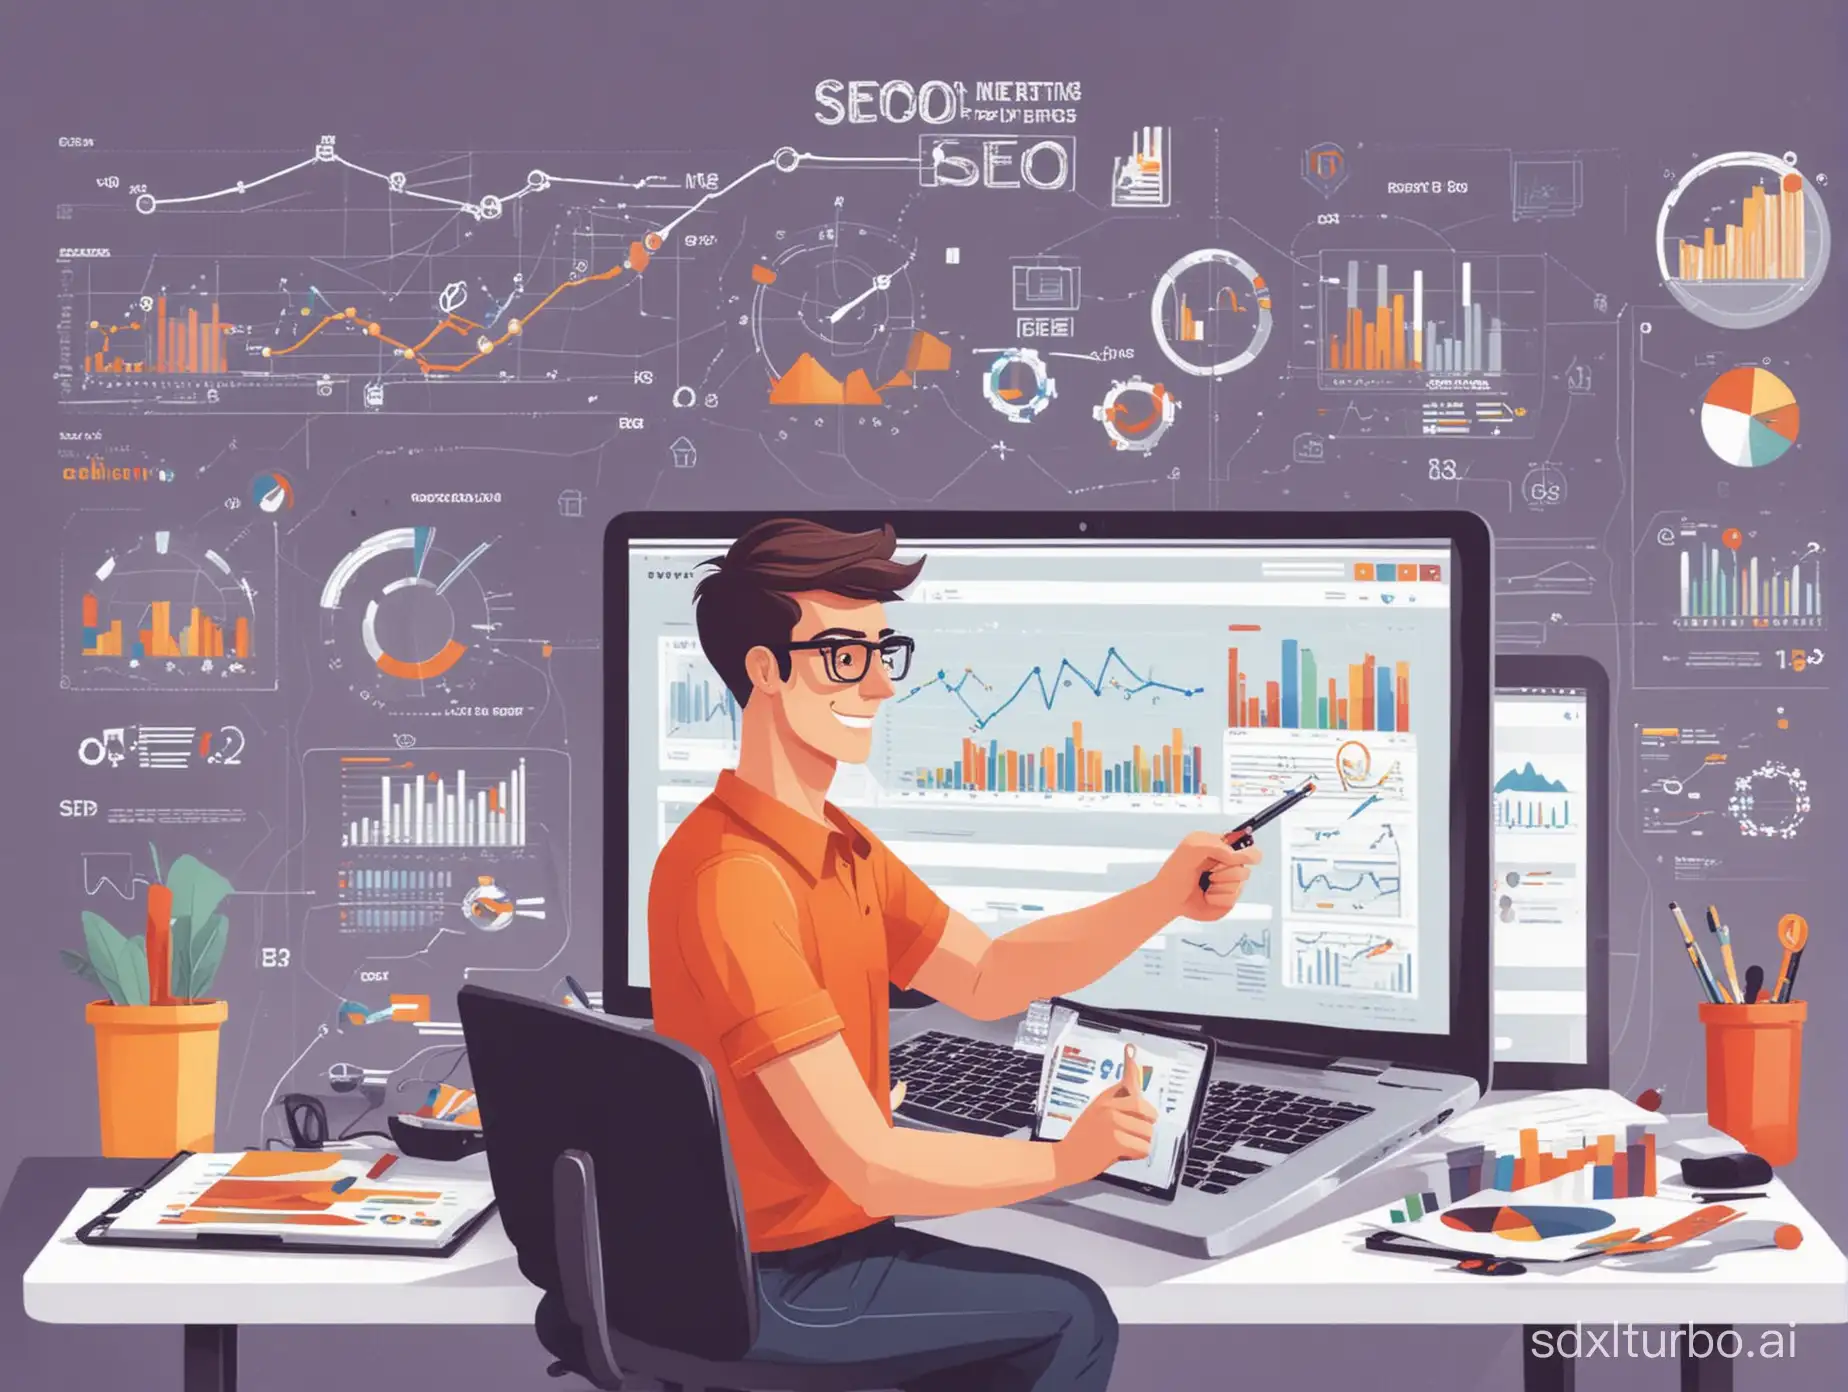 A digital marketing specialist working on SEO strategy, optimizing website on laptop, search engine ranking charts and graphs in background, trending flat illustration, vector art